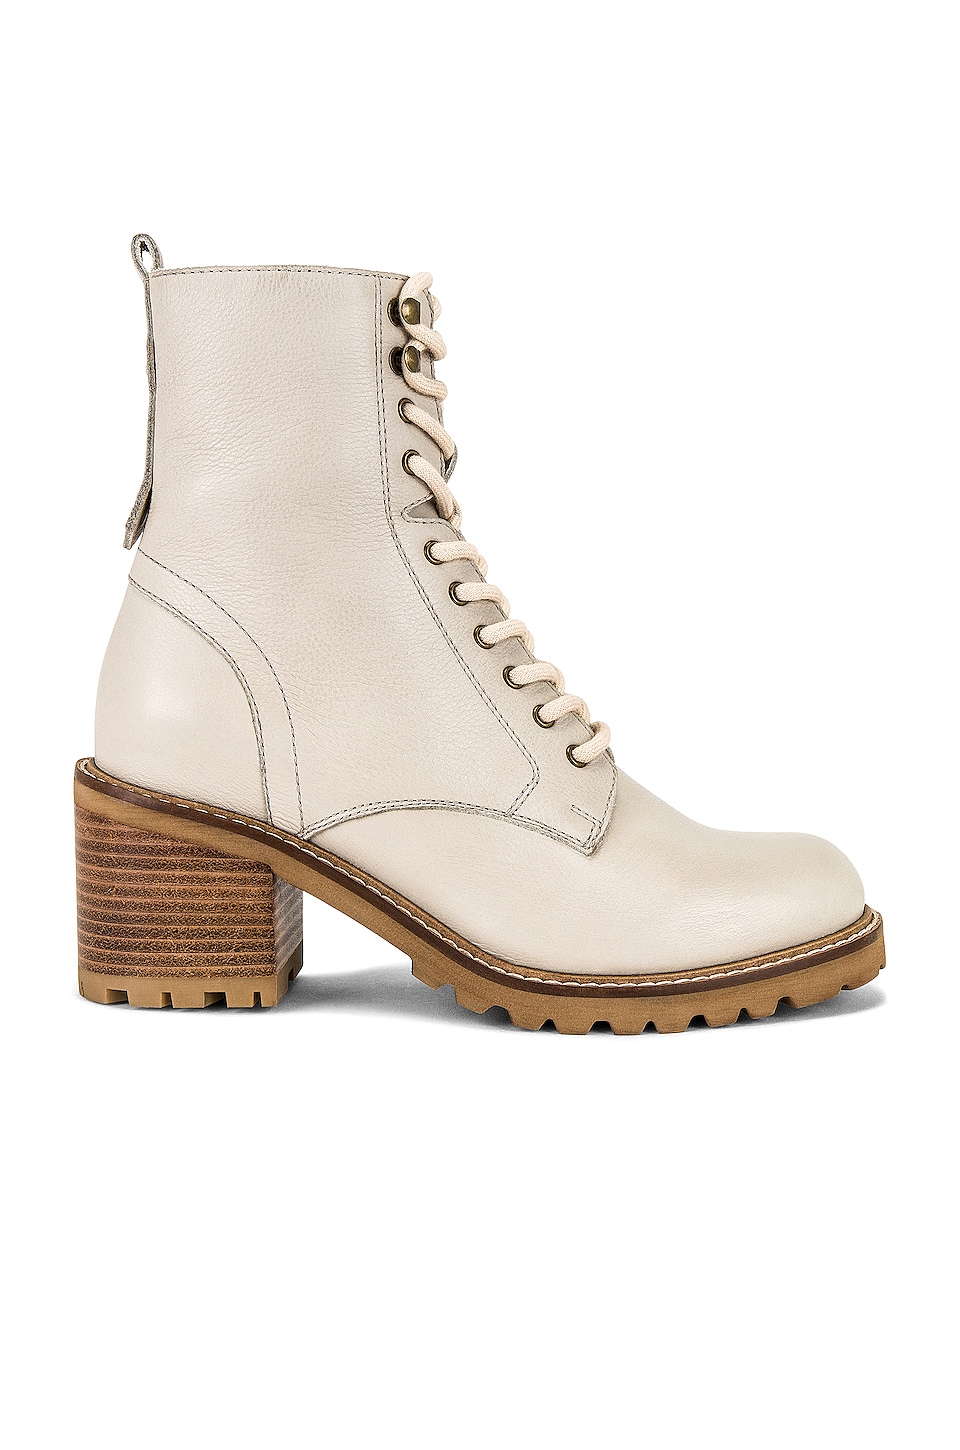 Seychelles Irresistible Bootie in Off White Leather & Natural Bottom ...